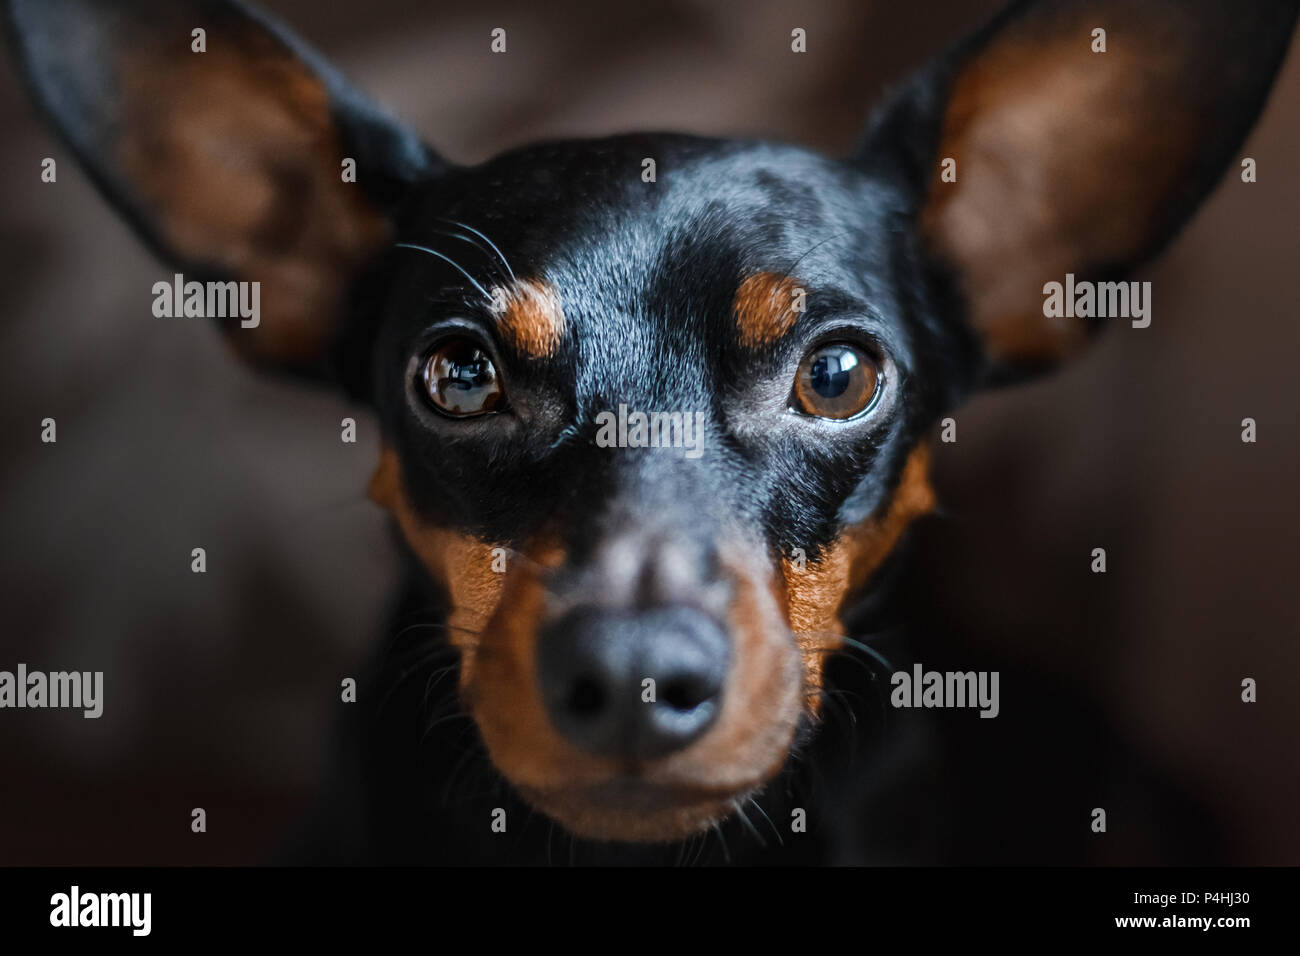 a portrait of a dog of a miniature pinscher, looks sadly into the camera. Selective focus on the eyes. Stock Photo